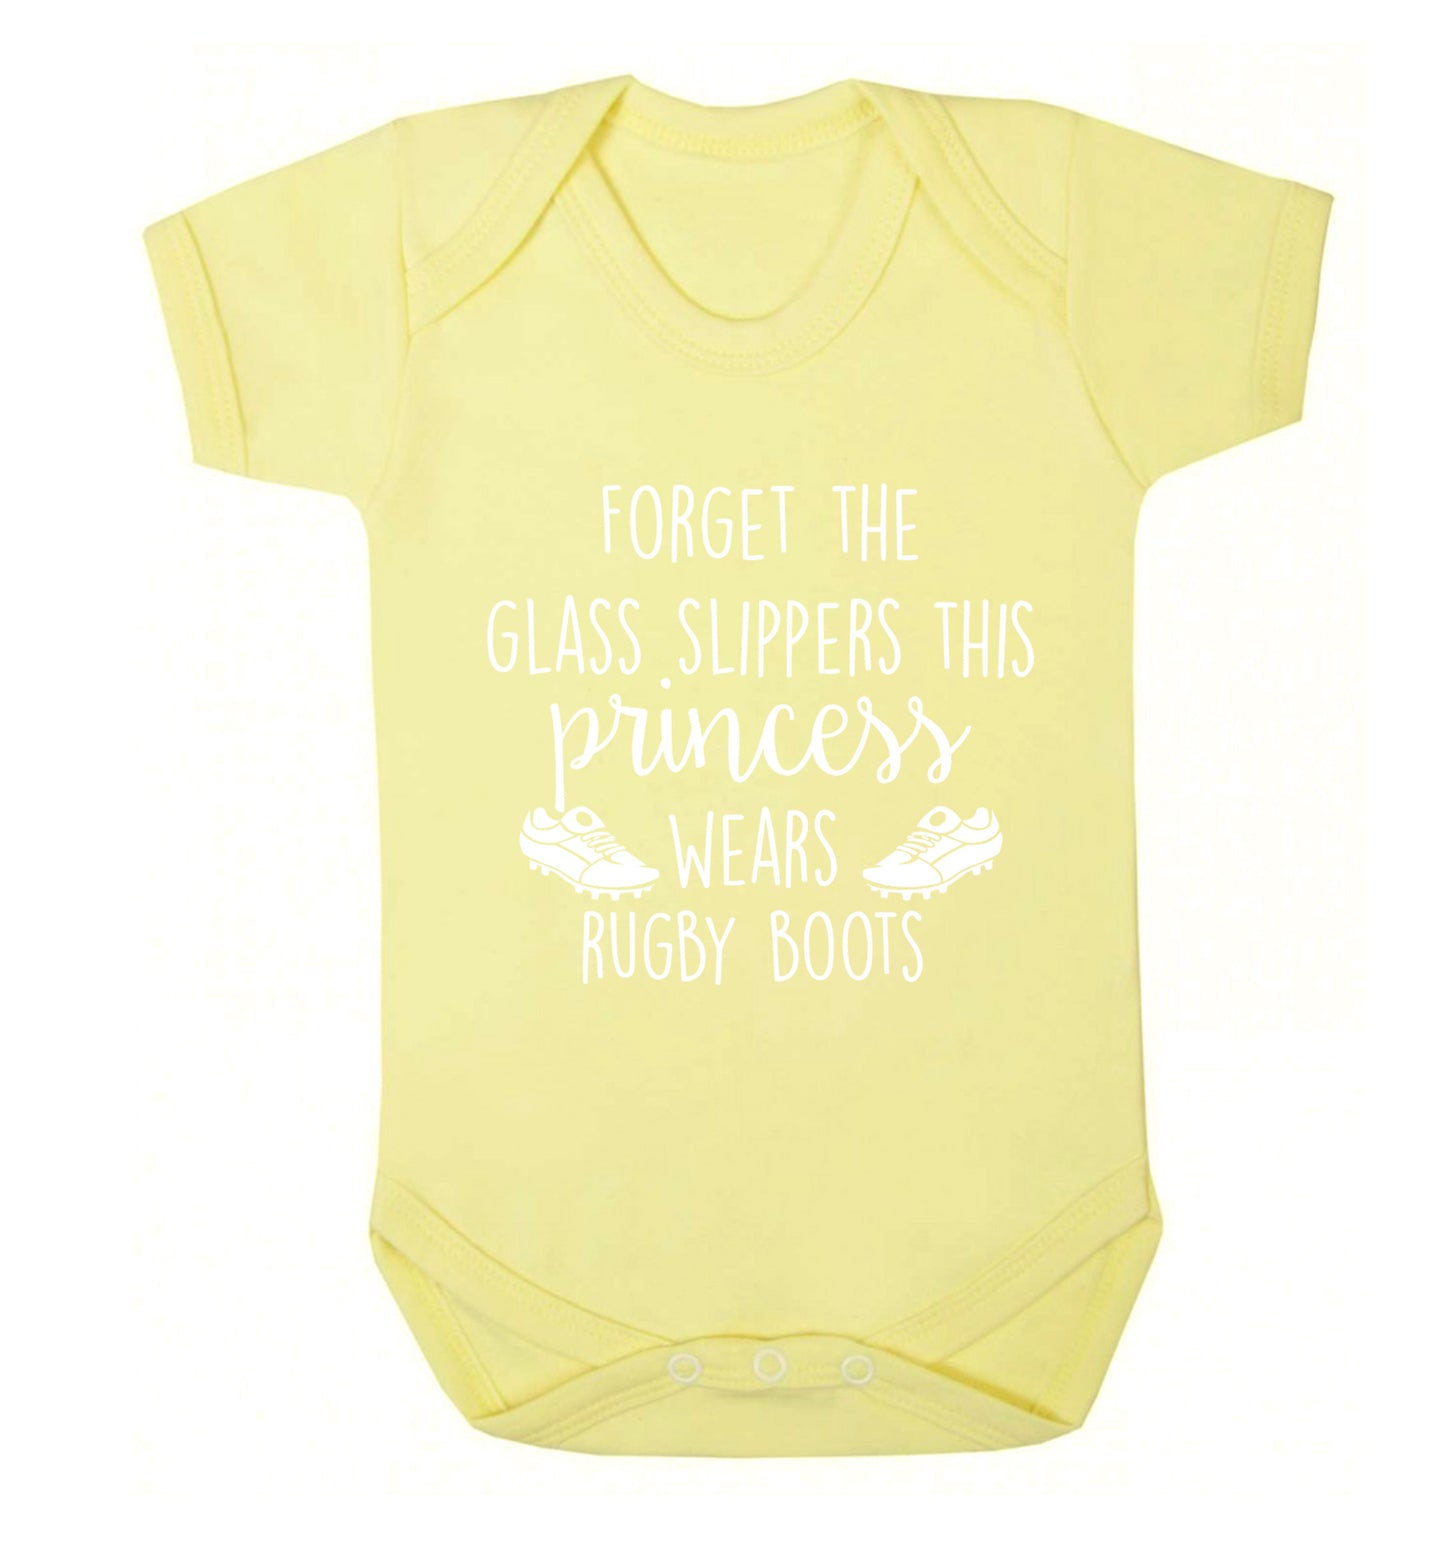 Forget the glass slippers this princess wears rugby boots Baby Vest pale yellow 18-24 months